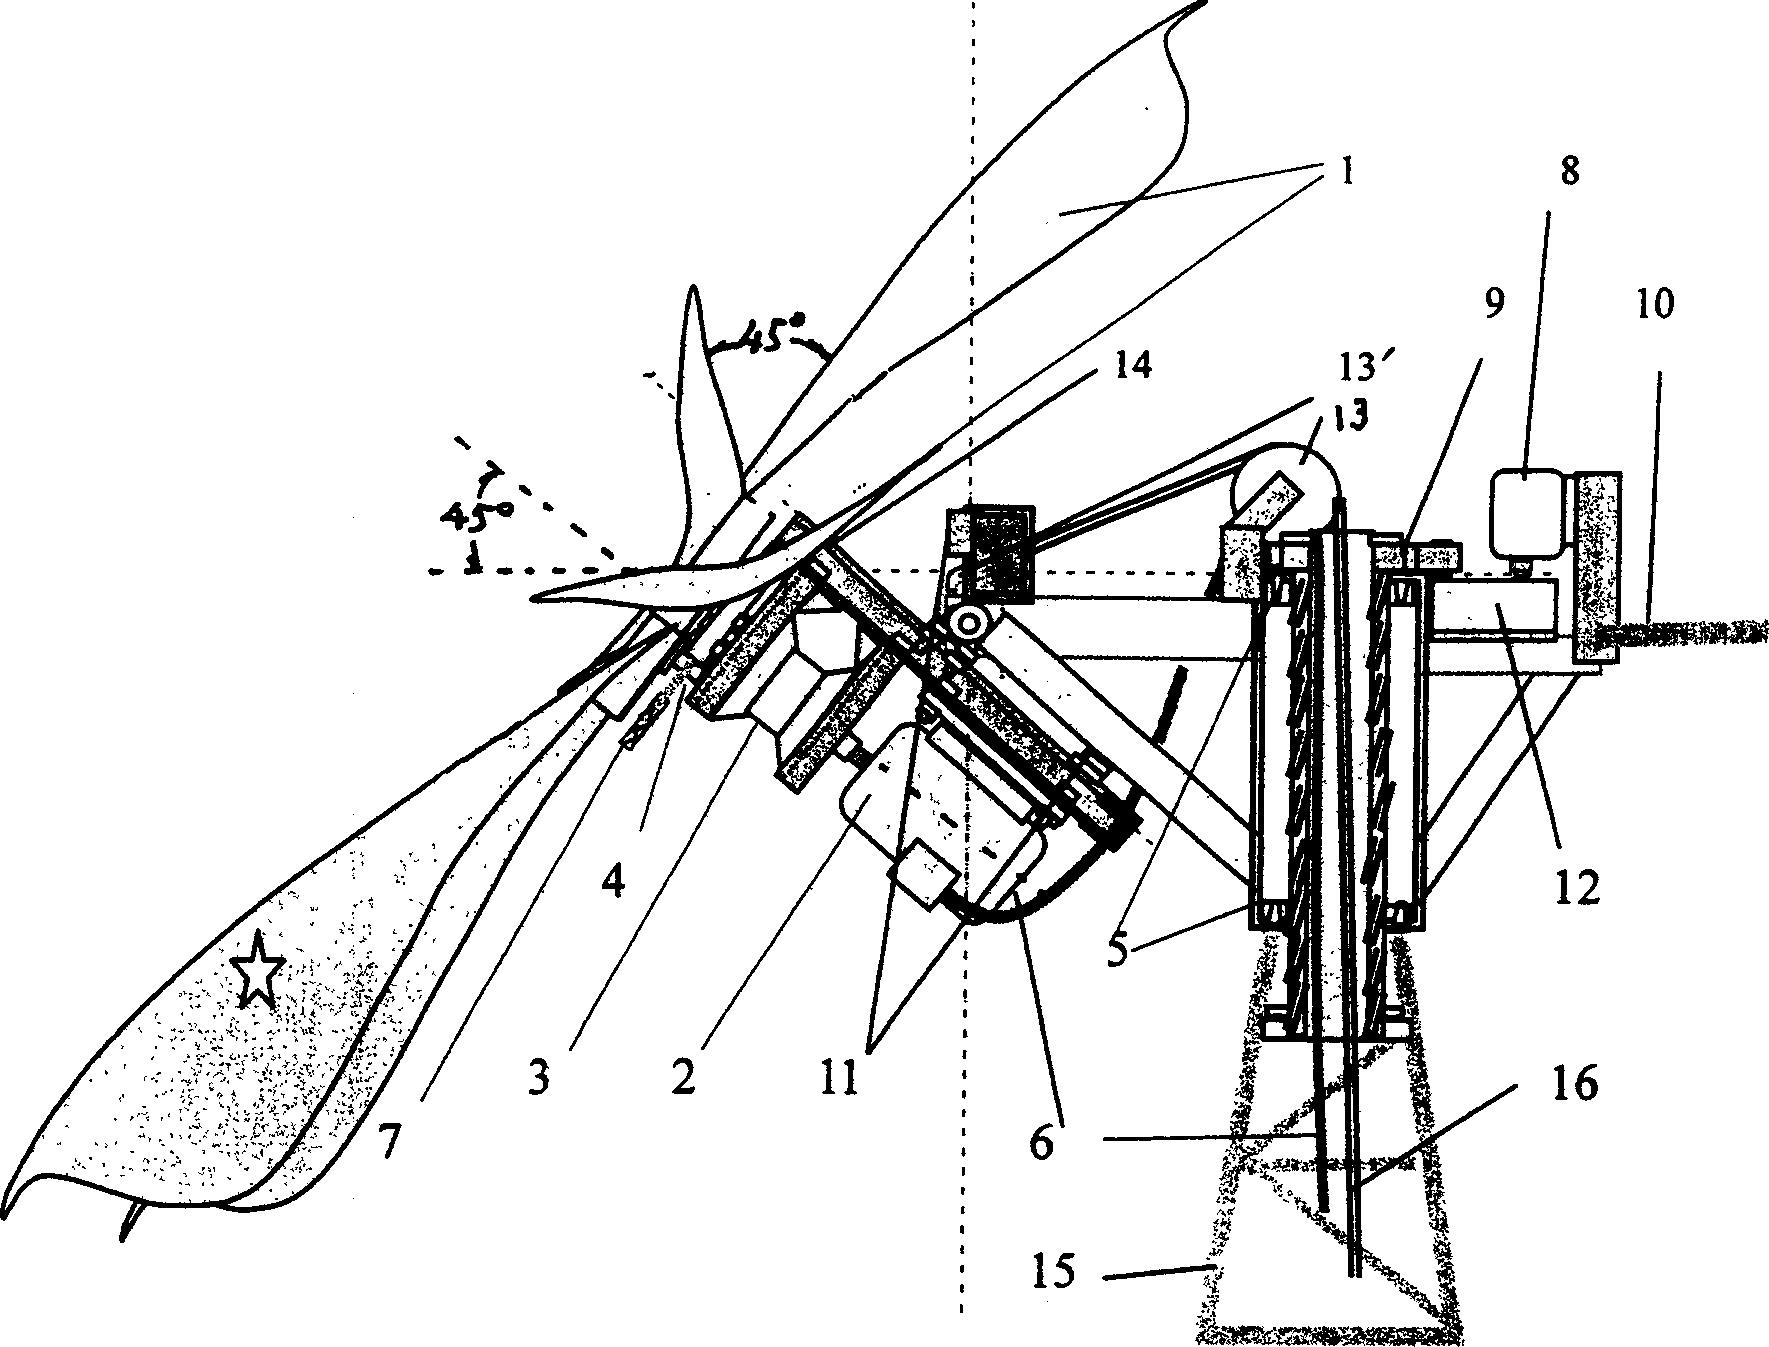 Oblique axis type windpower generating unit